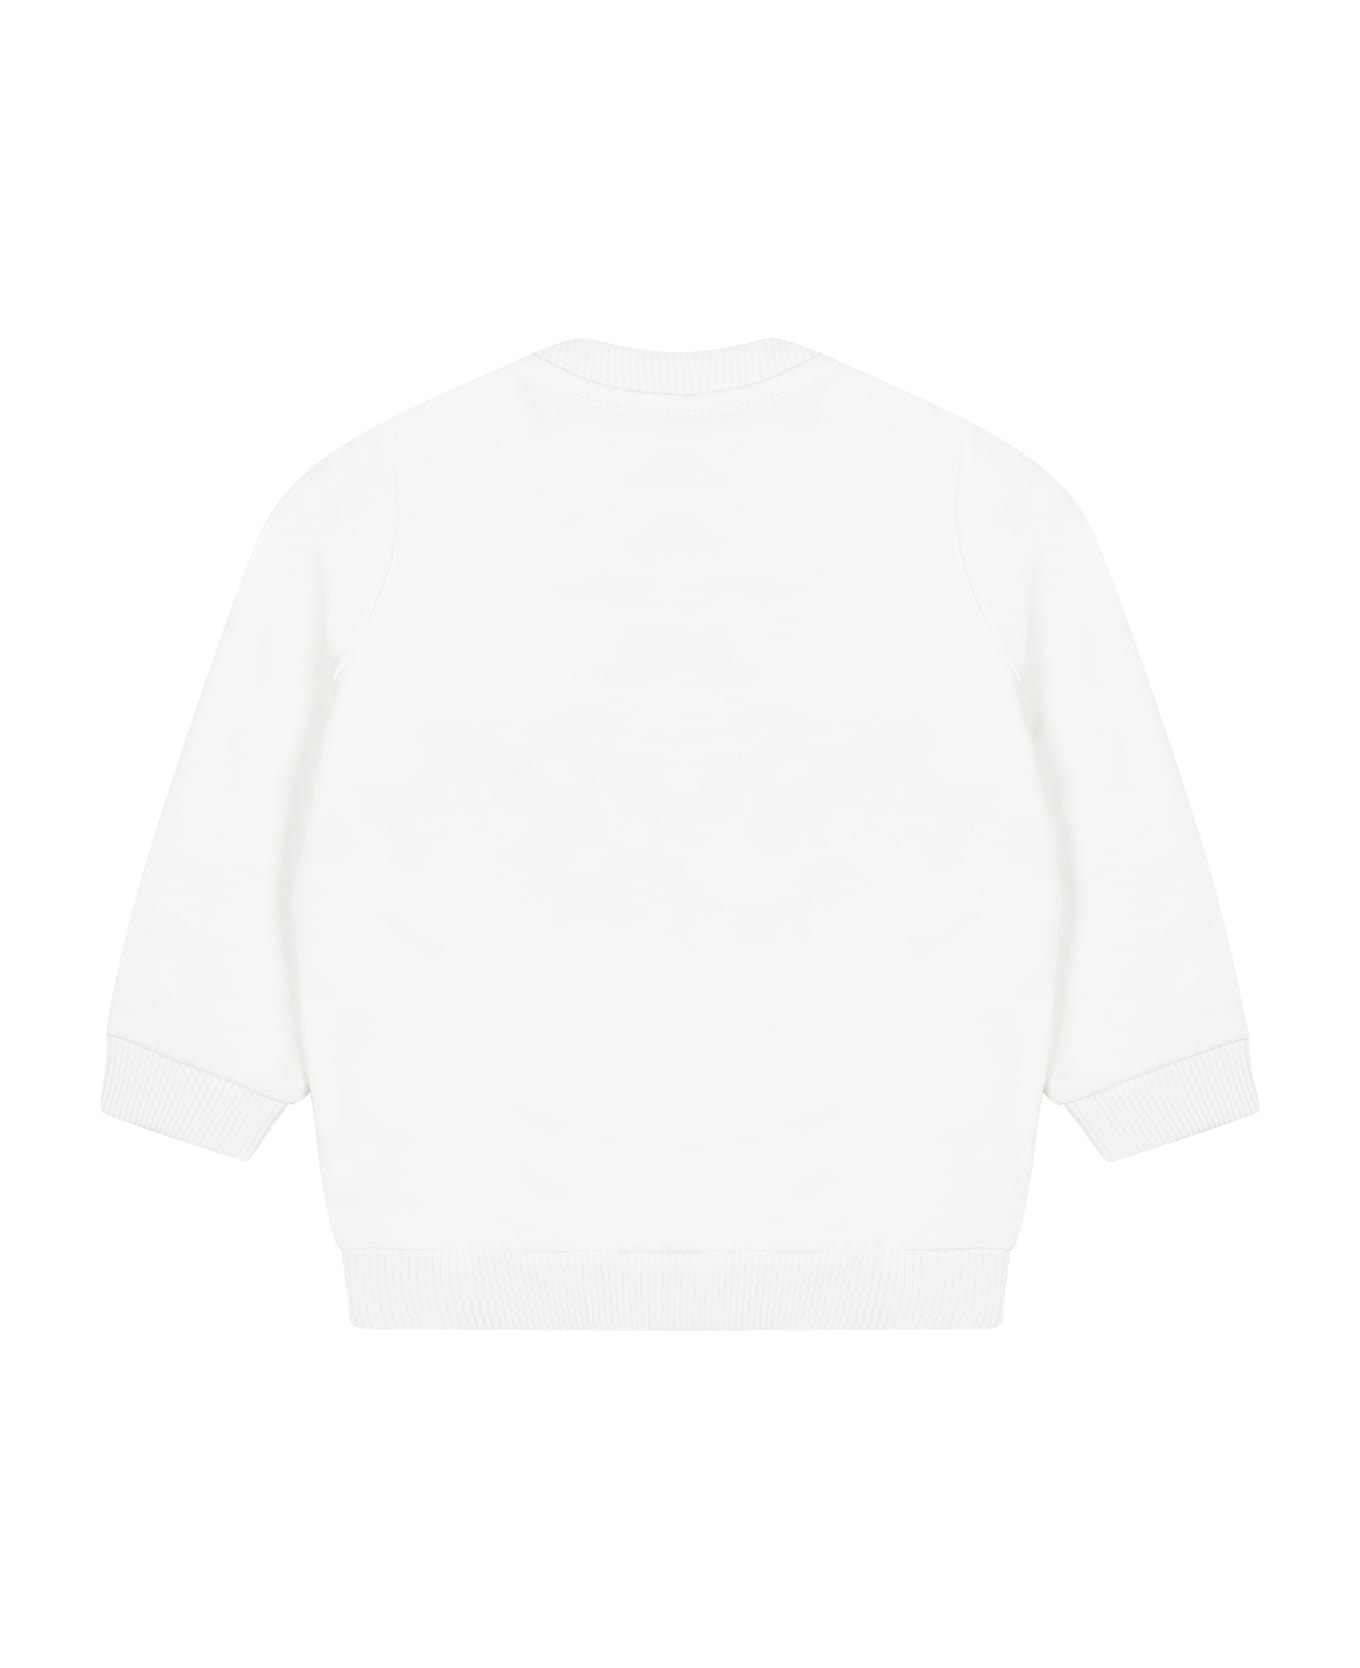 Moschino White Sweatshirt For Babies With Teddy Bears And Logo - White